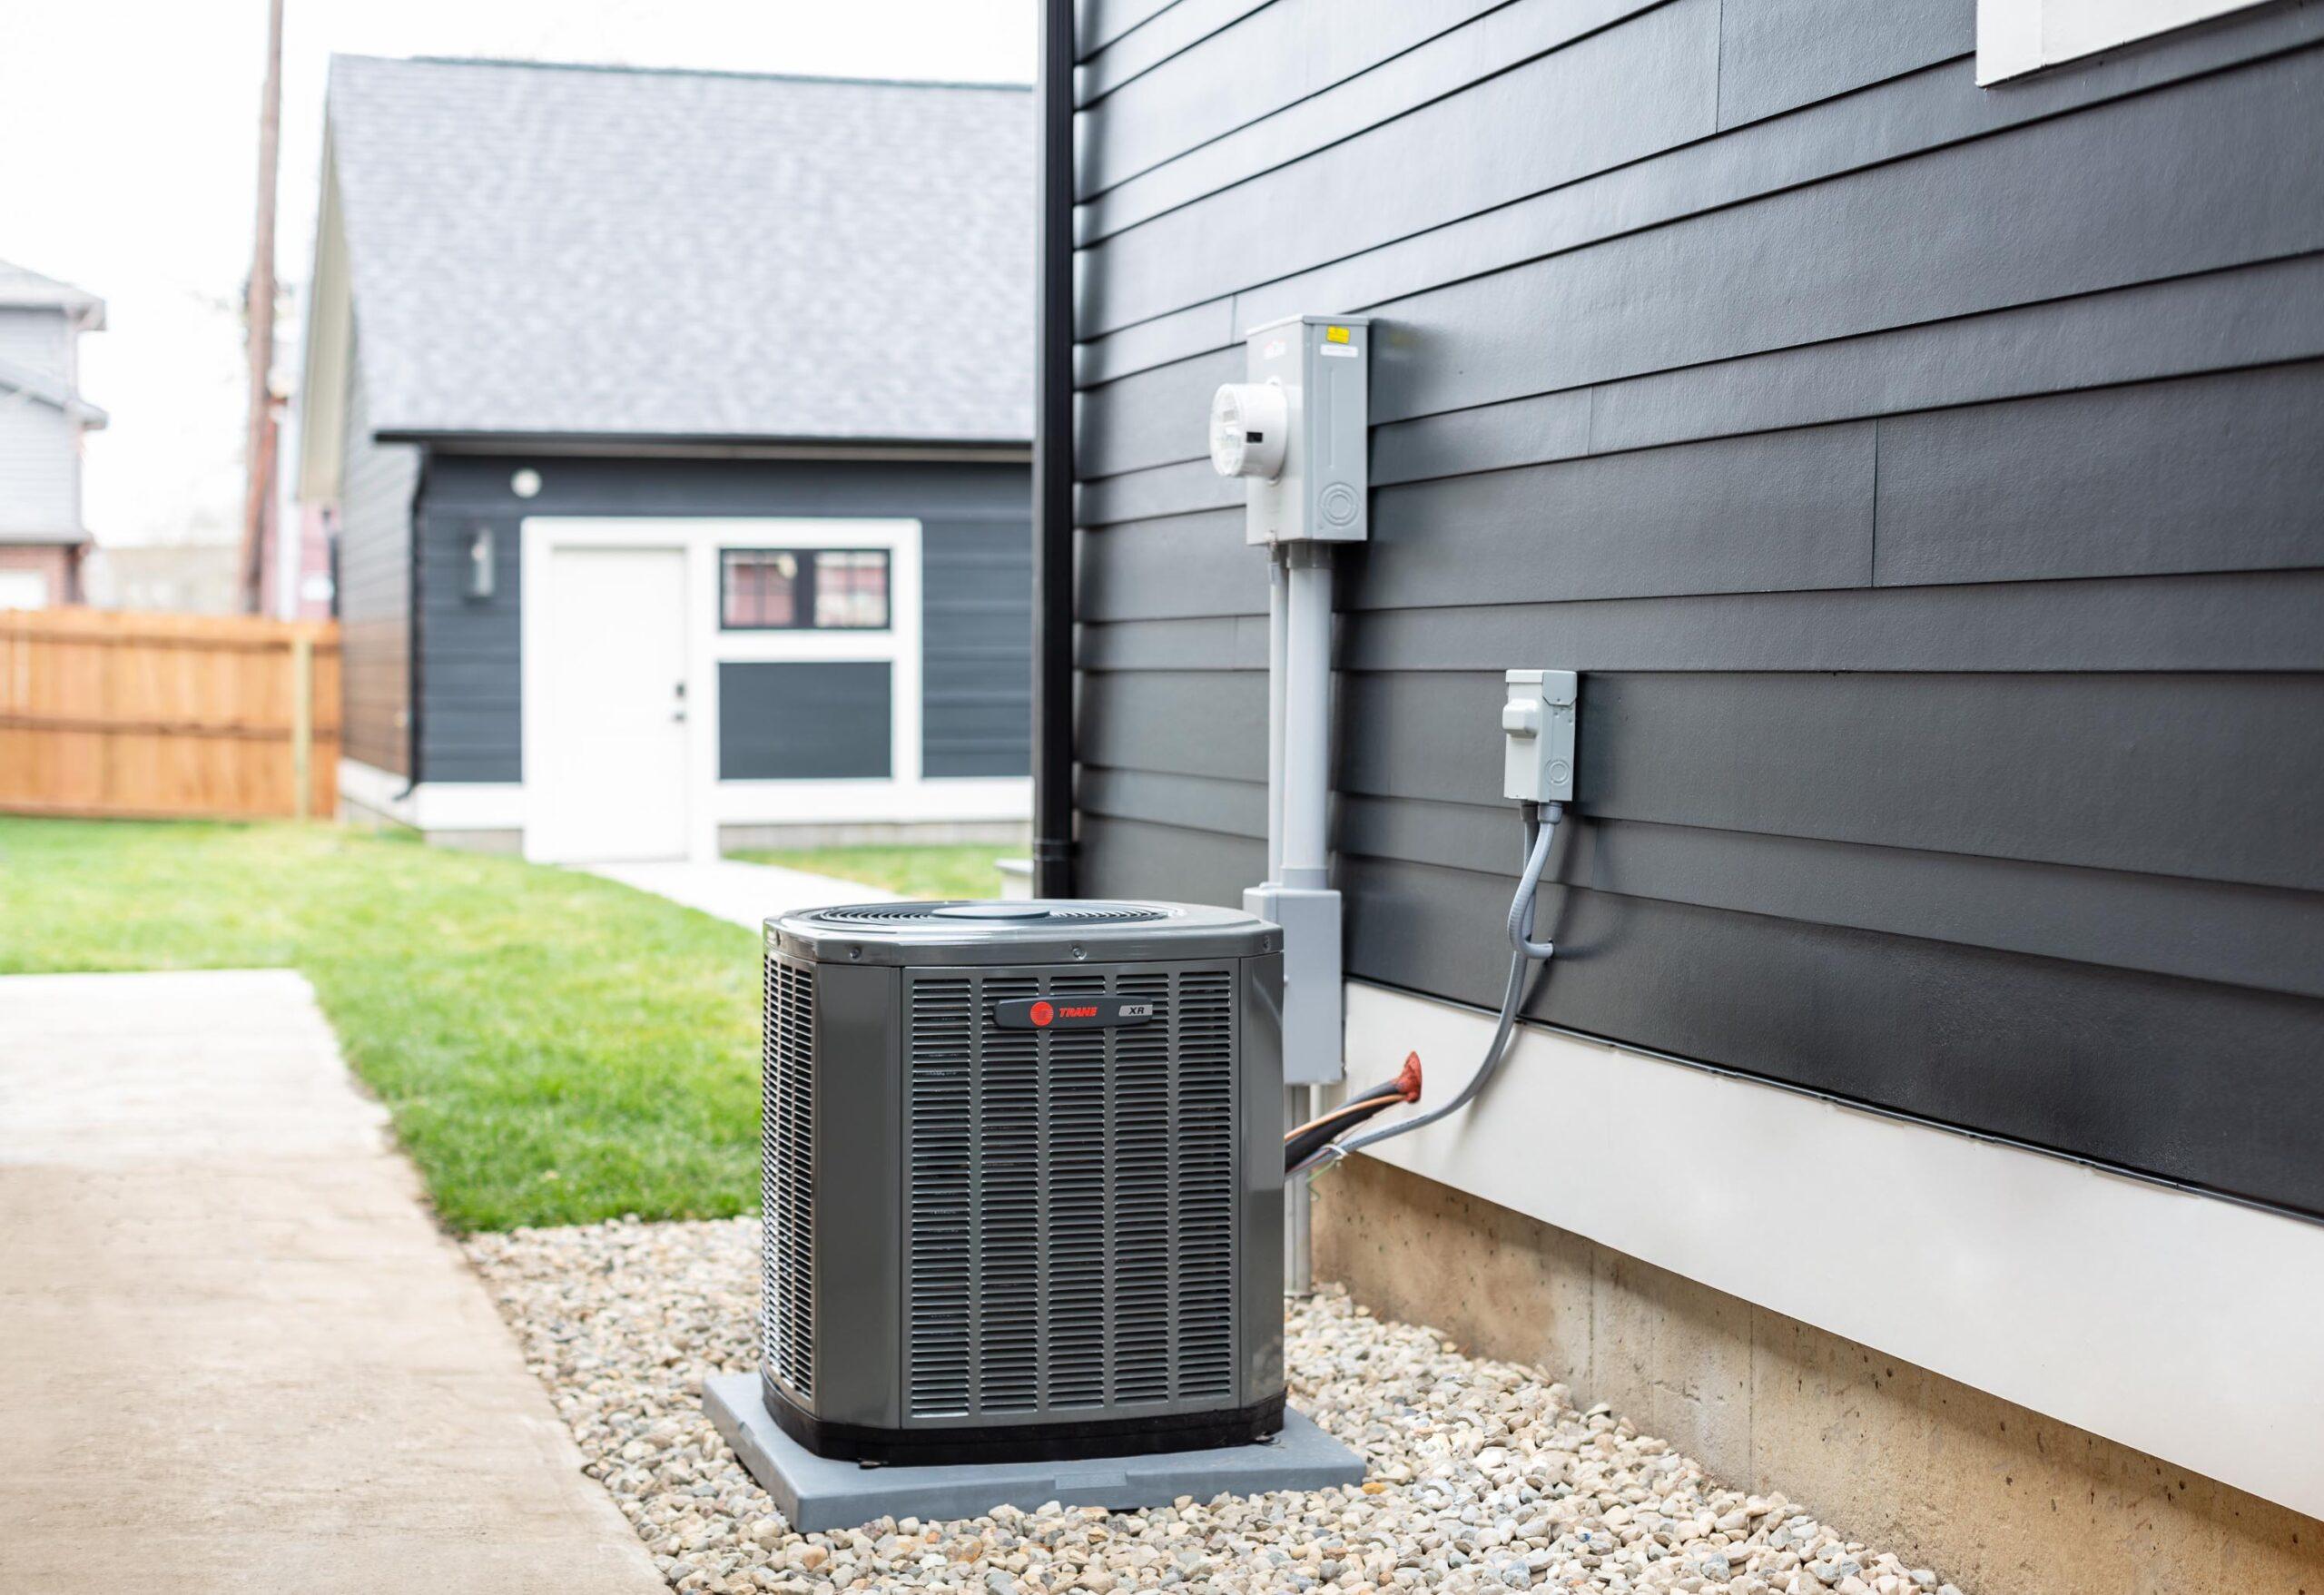 Helpful Tips to Follow When Replacing Your HVAC System